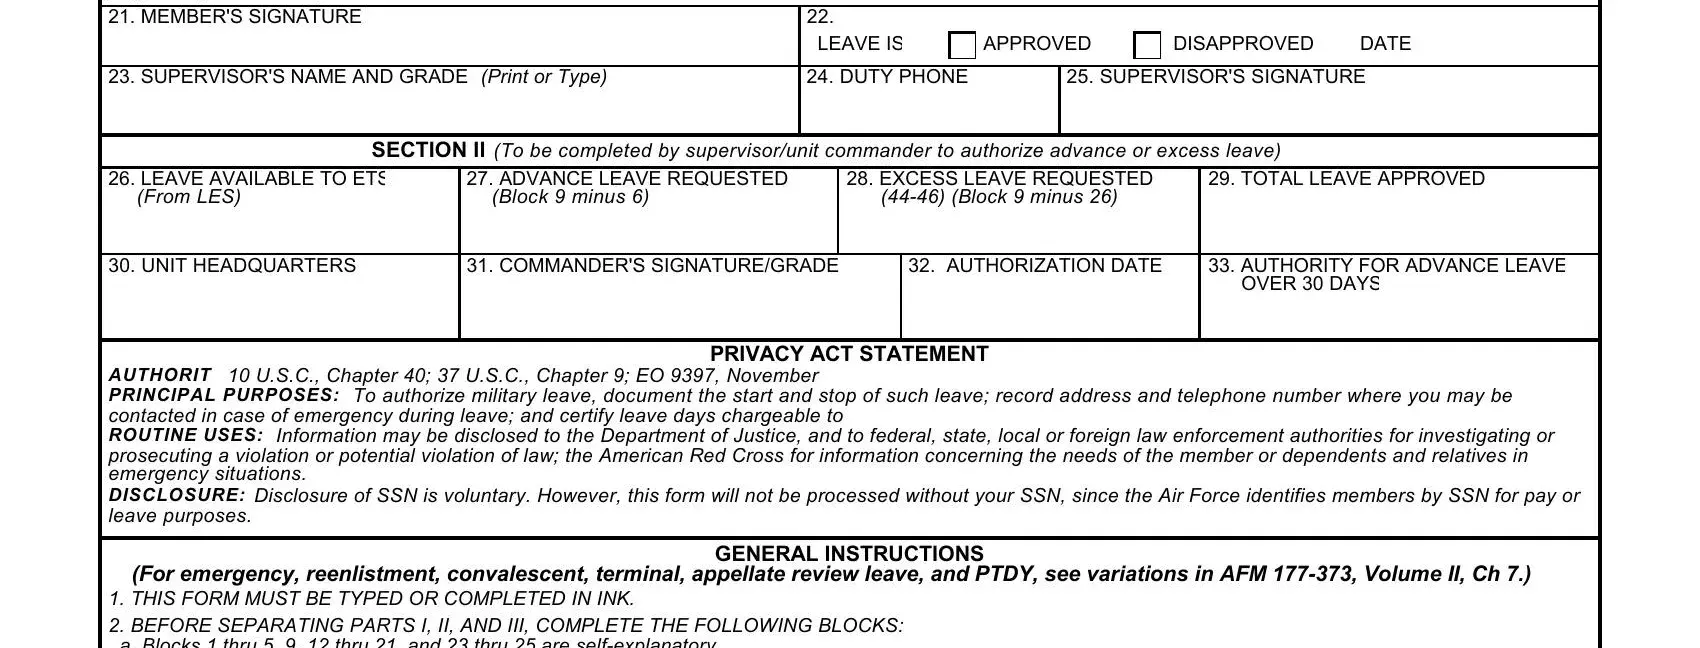 af form 988 LEAVE REQUEST CERTIFICATION:, APPROVED, DISAPPROVED, DATE, (From LES), (Block 9 minus 6), SECTION II (To be completed by, PRIVACY ACT STATEMENT, To authorize military leave, AUTHORIT 10 U, Information may be disclosed to, GENERAL INSTRUCTIONS, and (For emergency fields to fill out